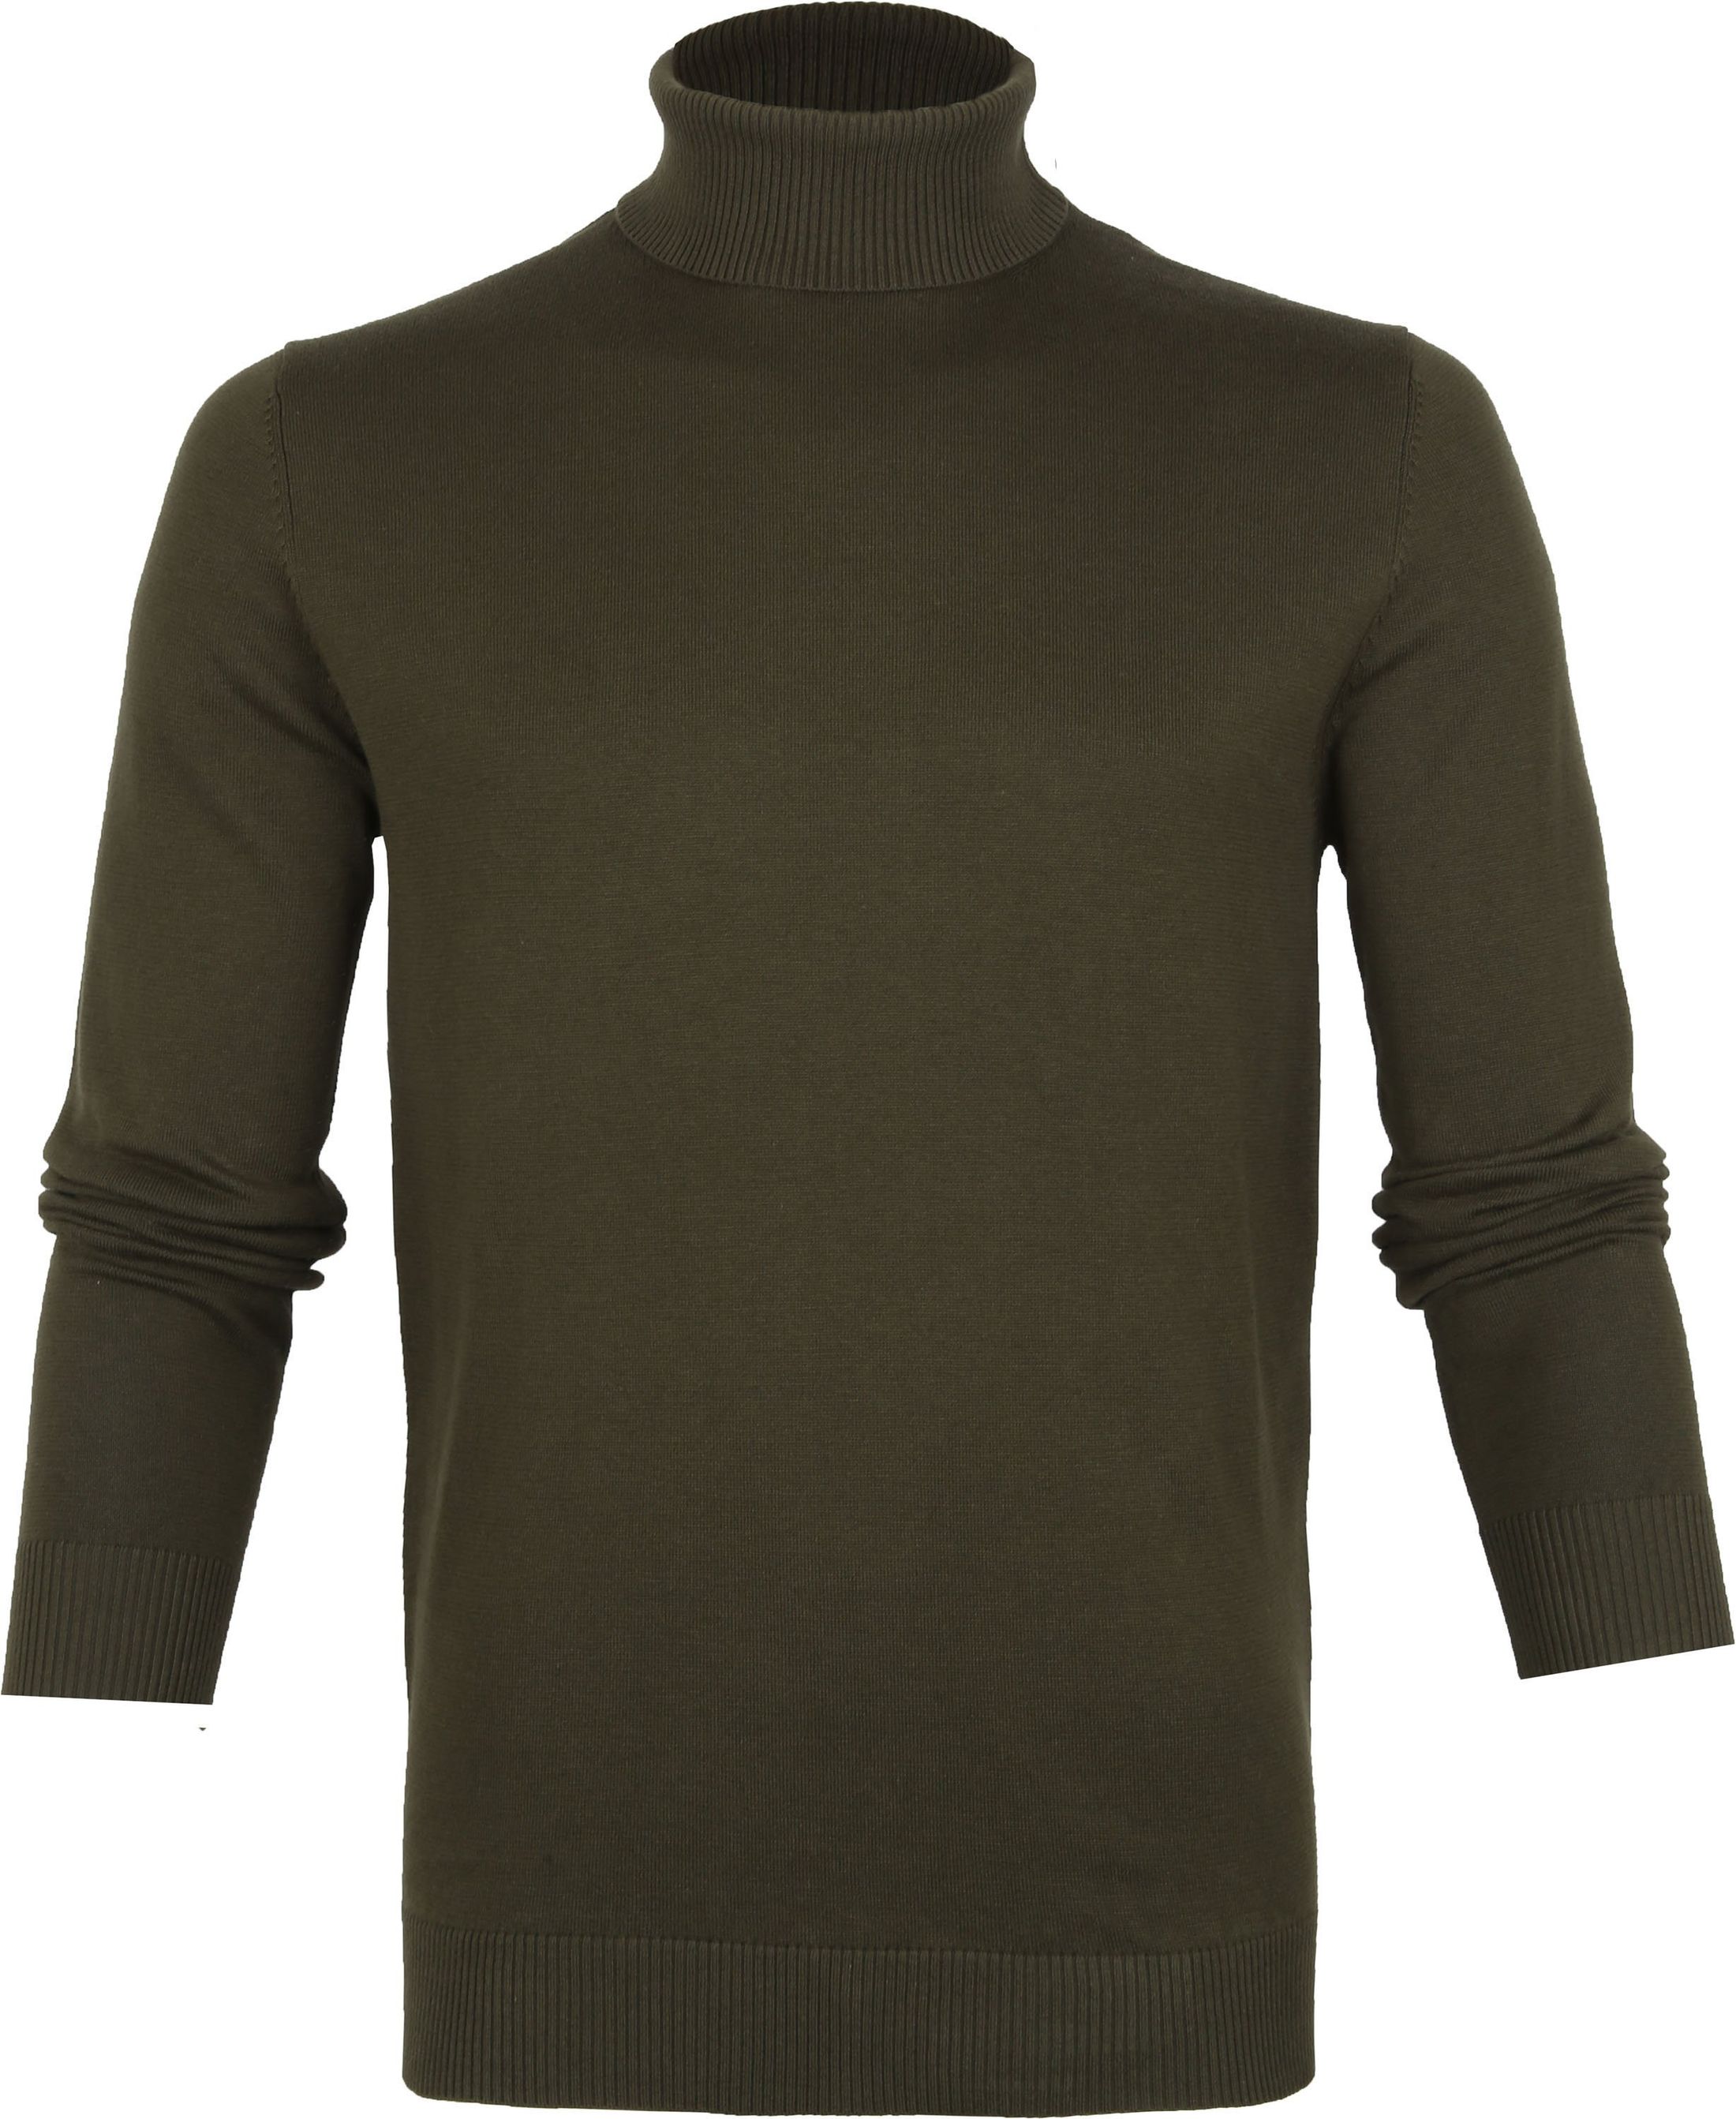 Suitable Respect Cox Pullover Turtleneck Olive Dark Green Green size L